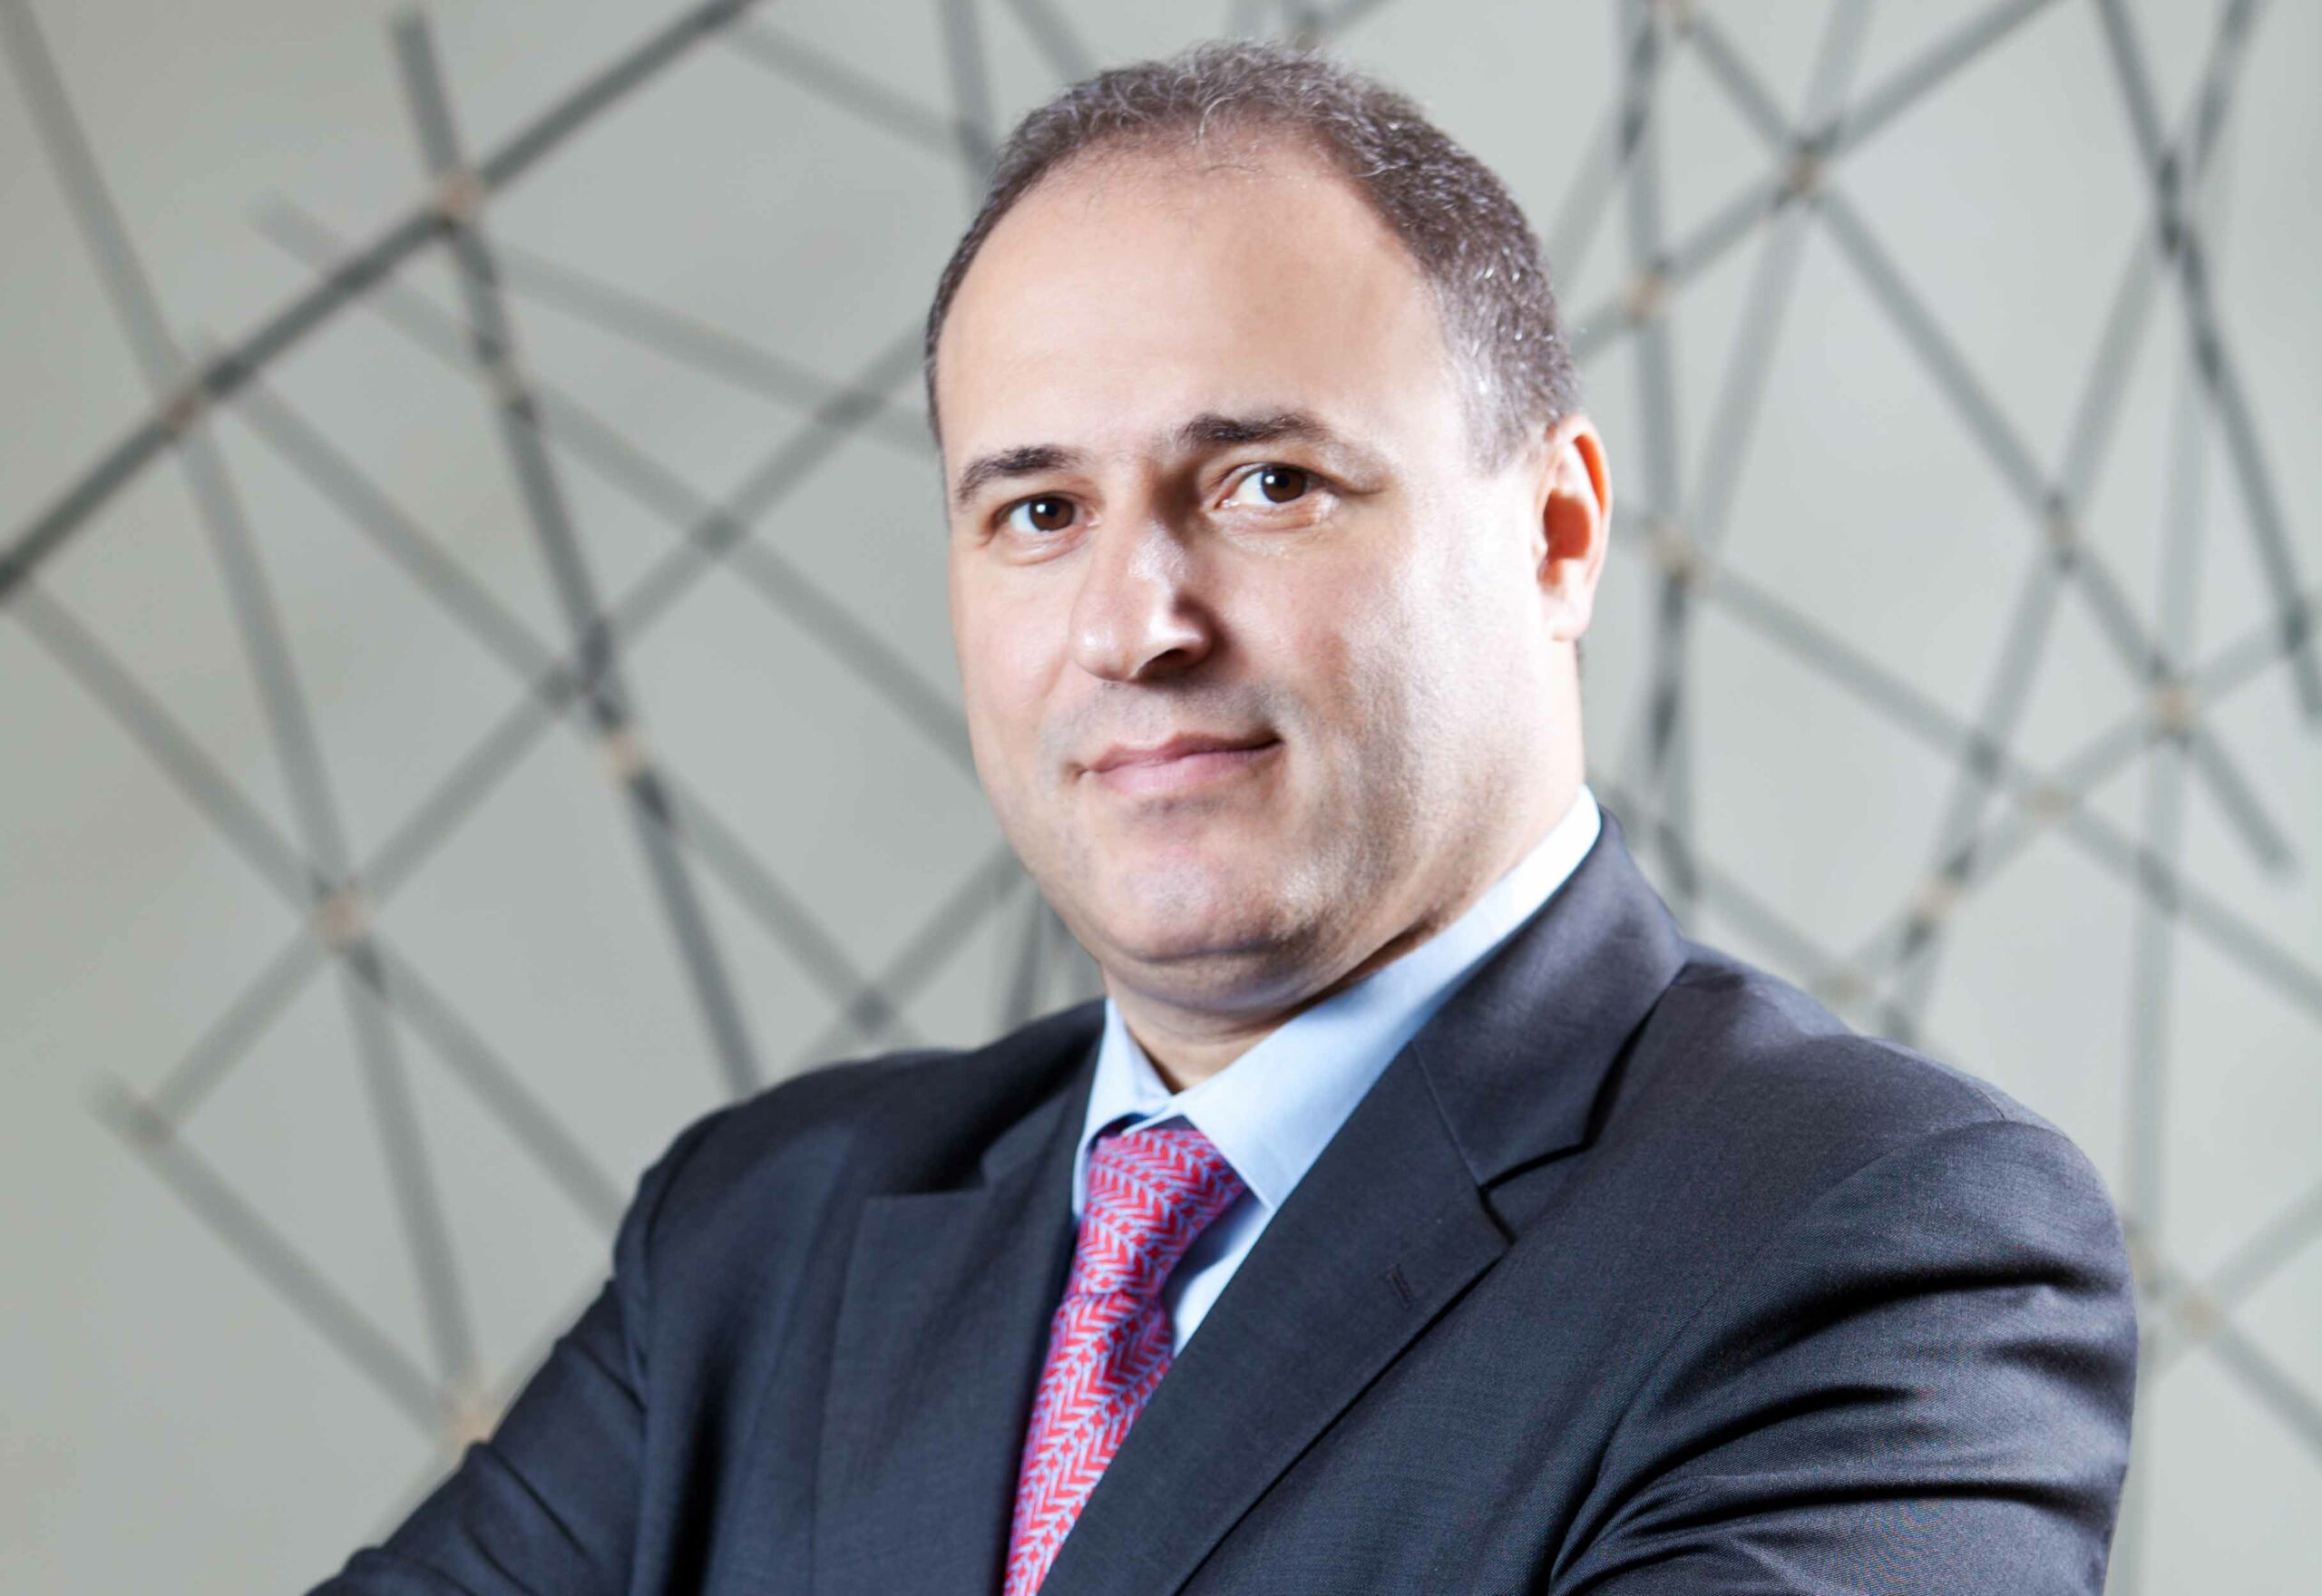 Crowne Plaza Dubai welcomes director of marketing - Hotelier Middle East